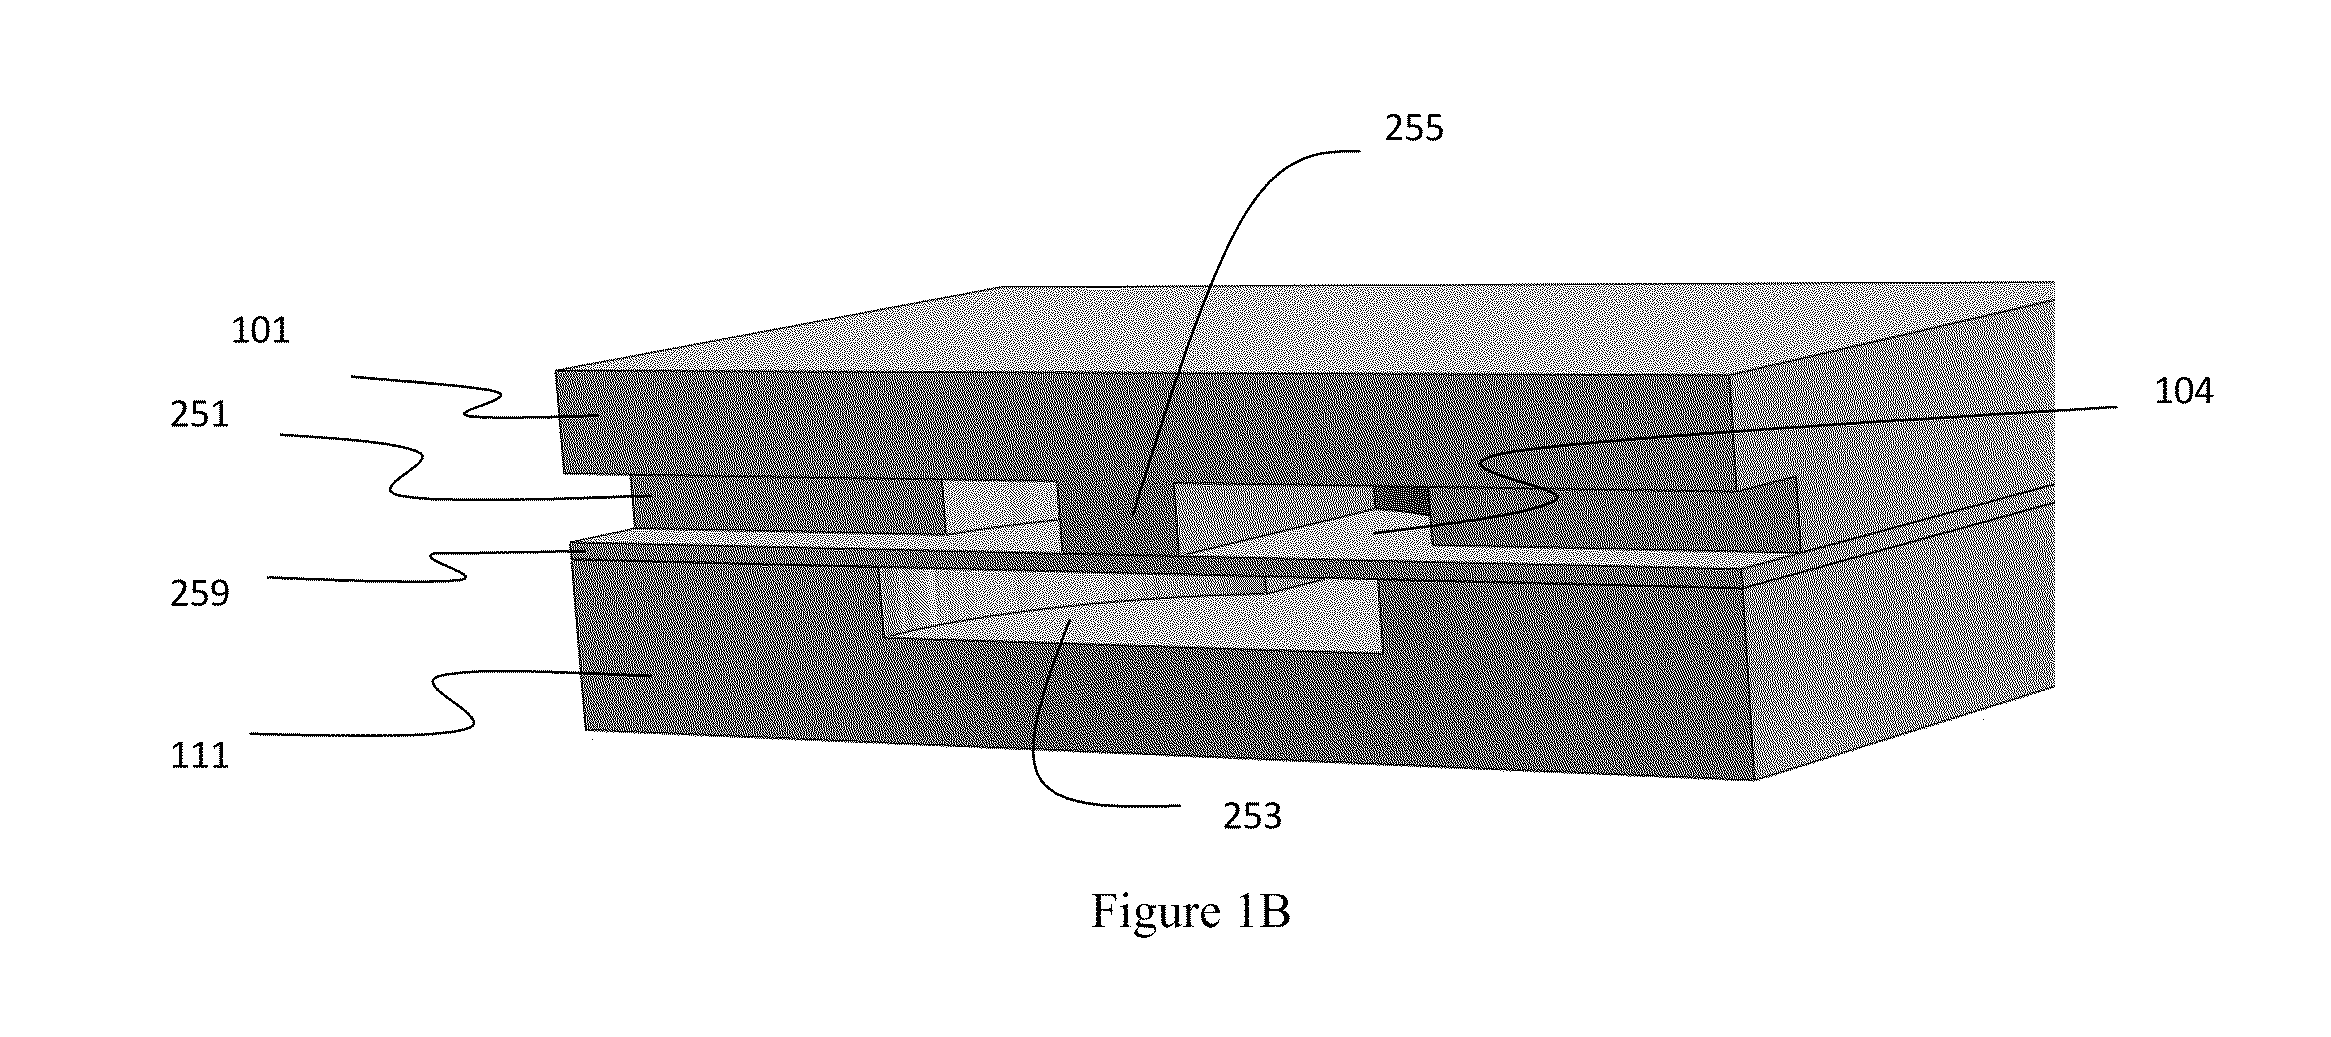 Universal sample preparation system and use in an integrated analysis system